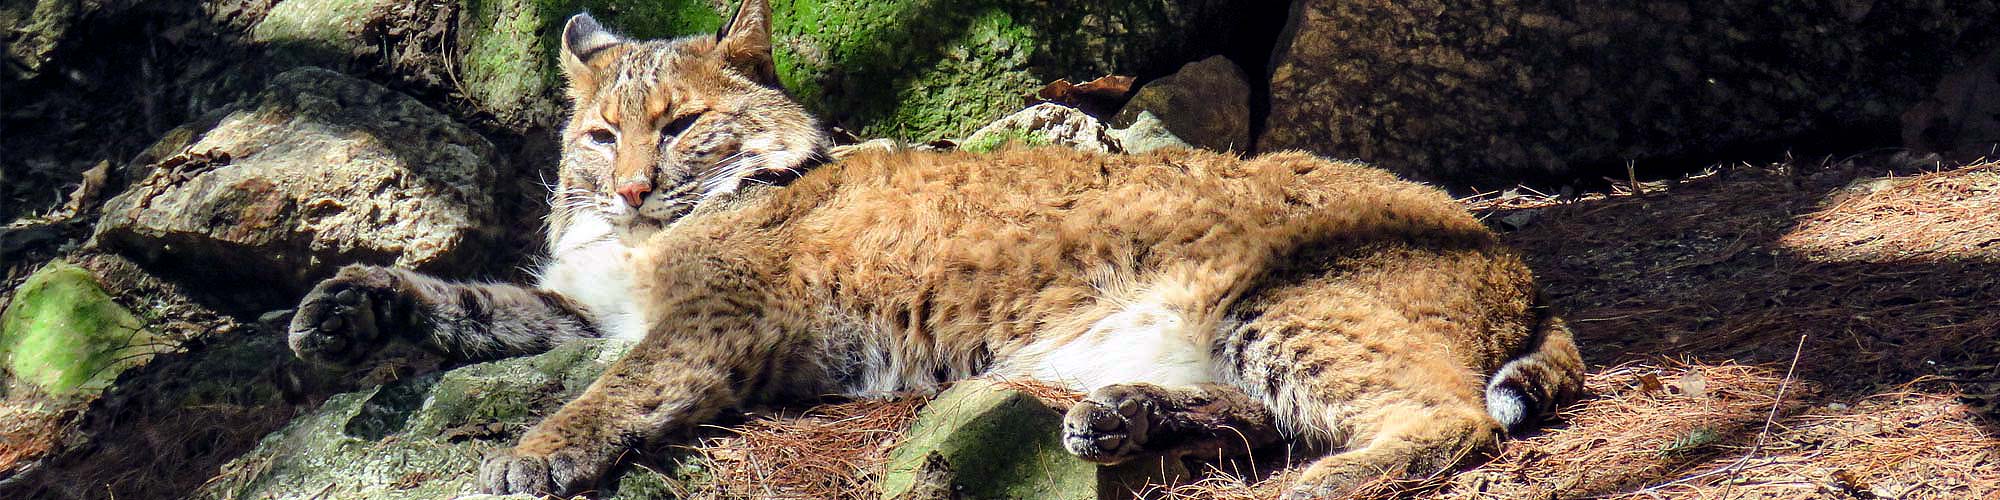 Bobcat laying in the sunshine